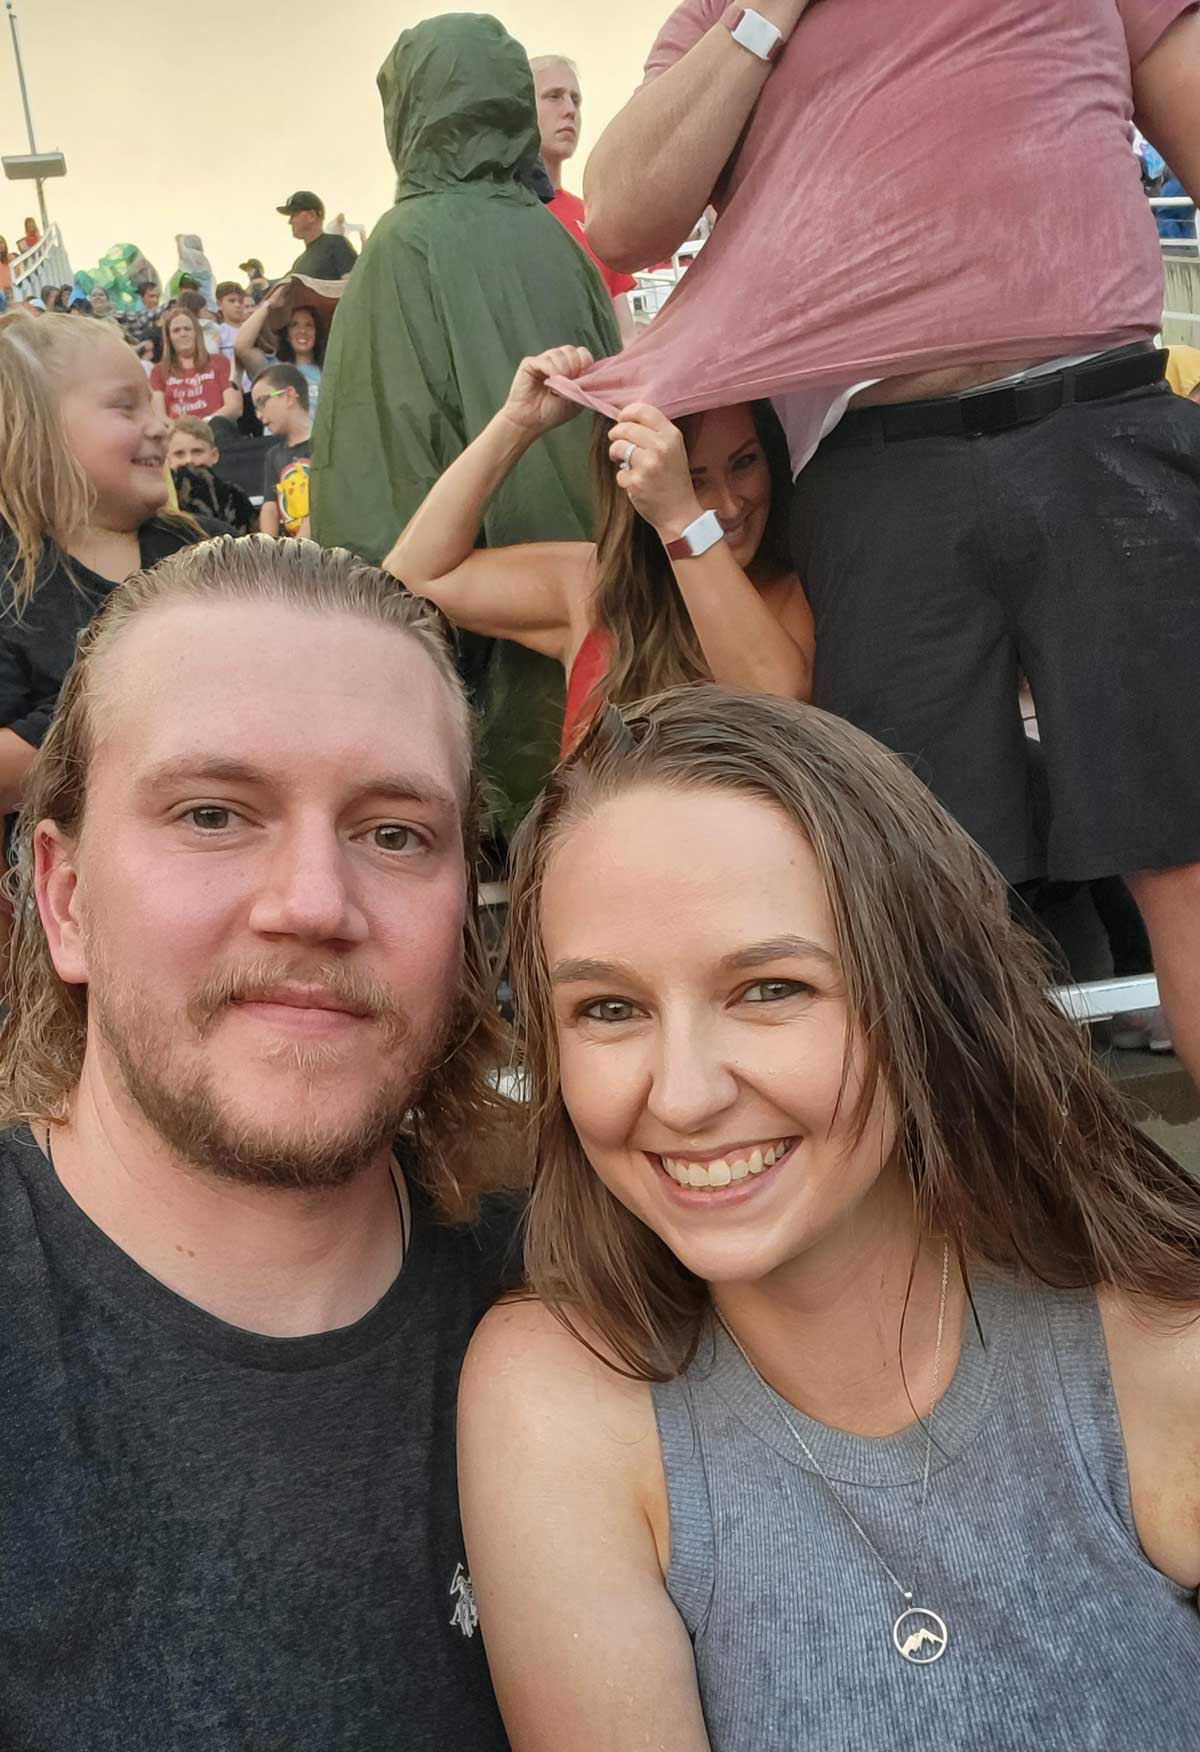 It was raining when we took a few selfies at a concert. I didn't notice this gem until the next day